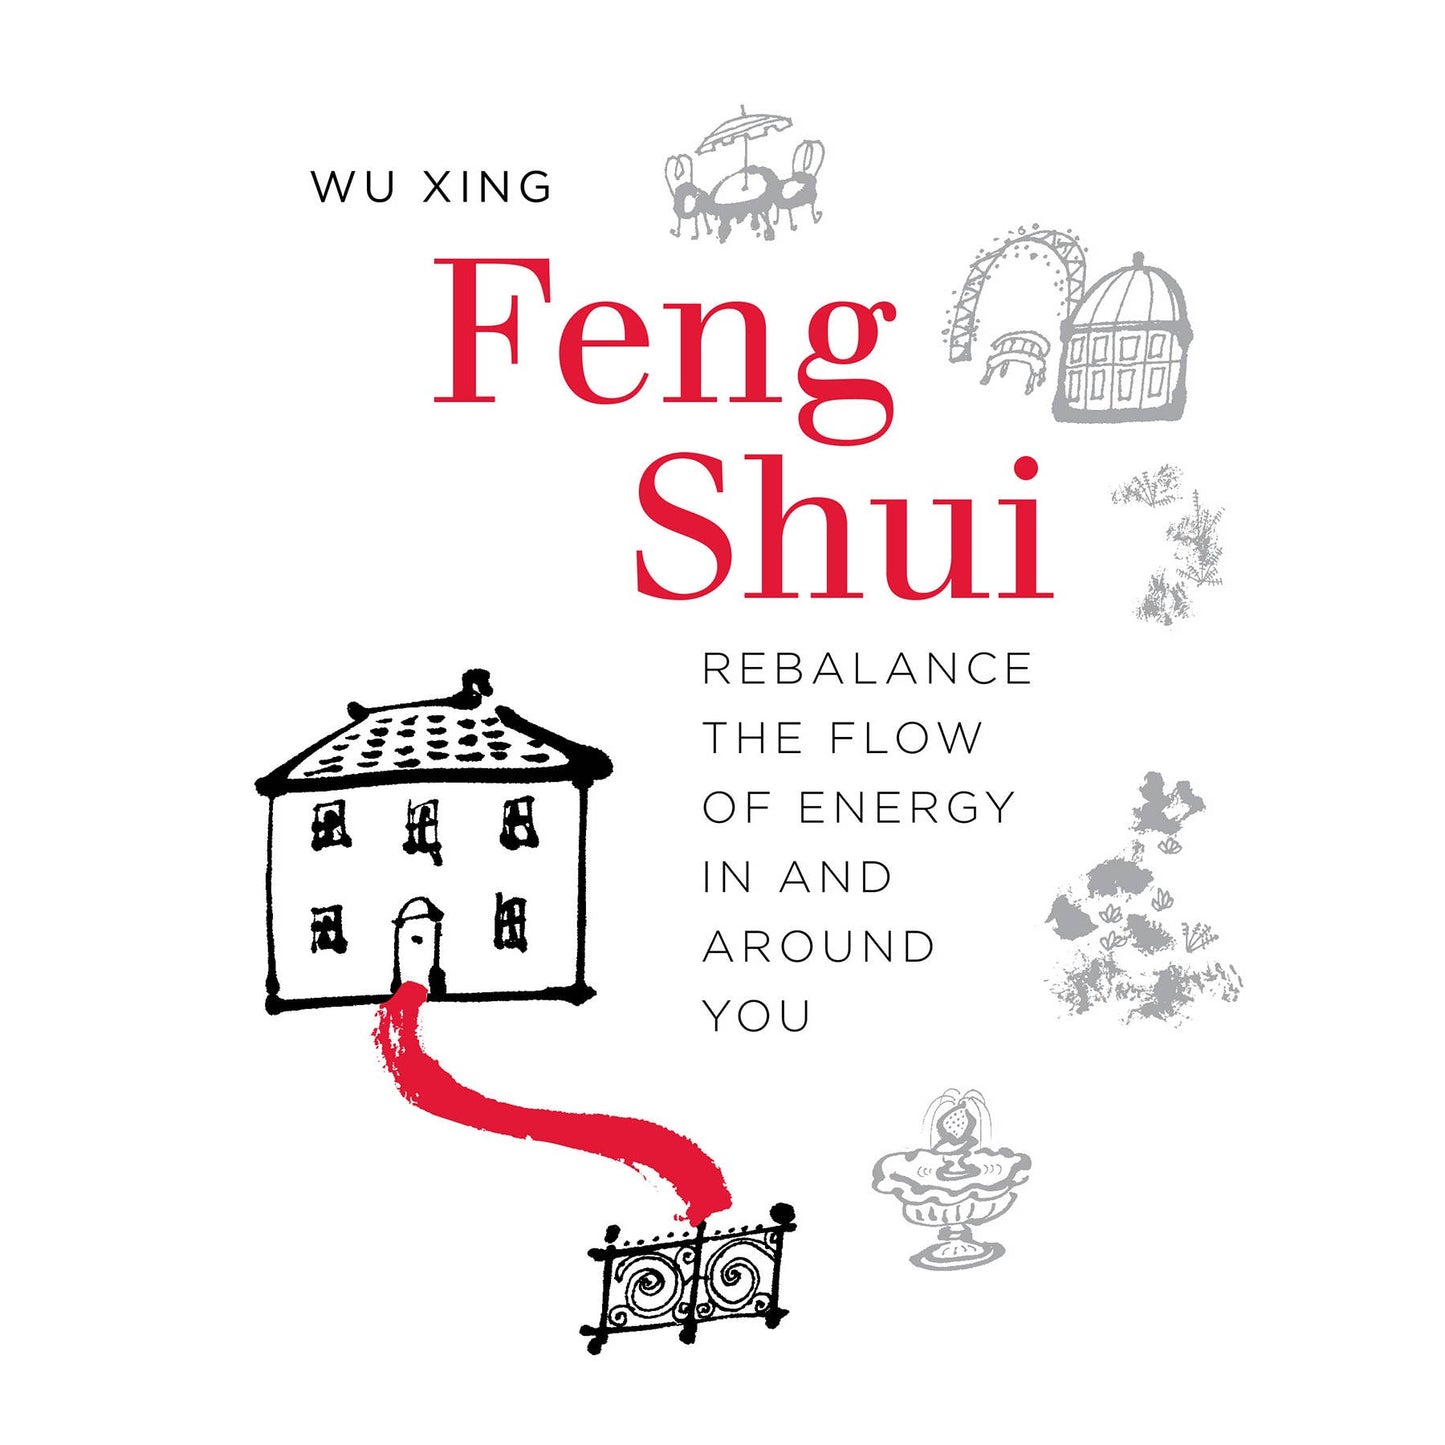 Feng Shui
- Rebalance the flow of energy in and around you.